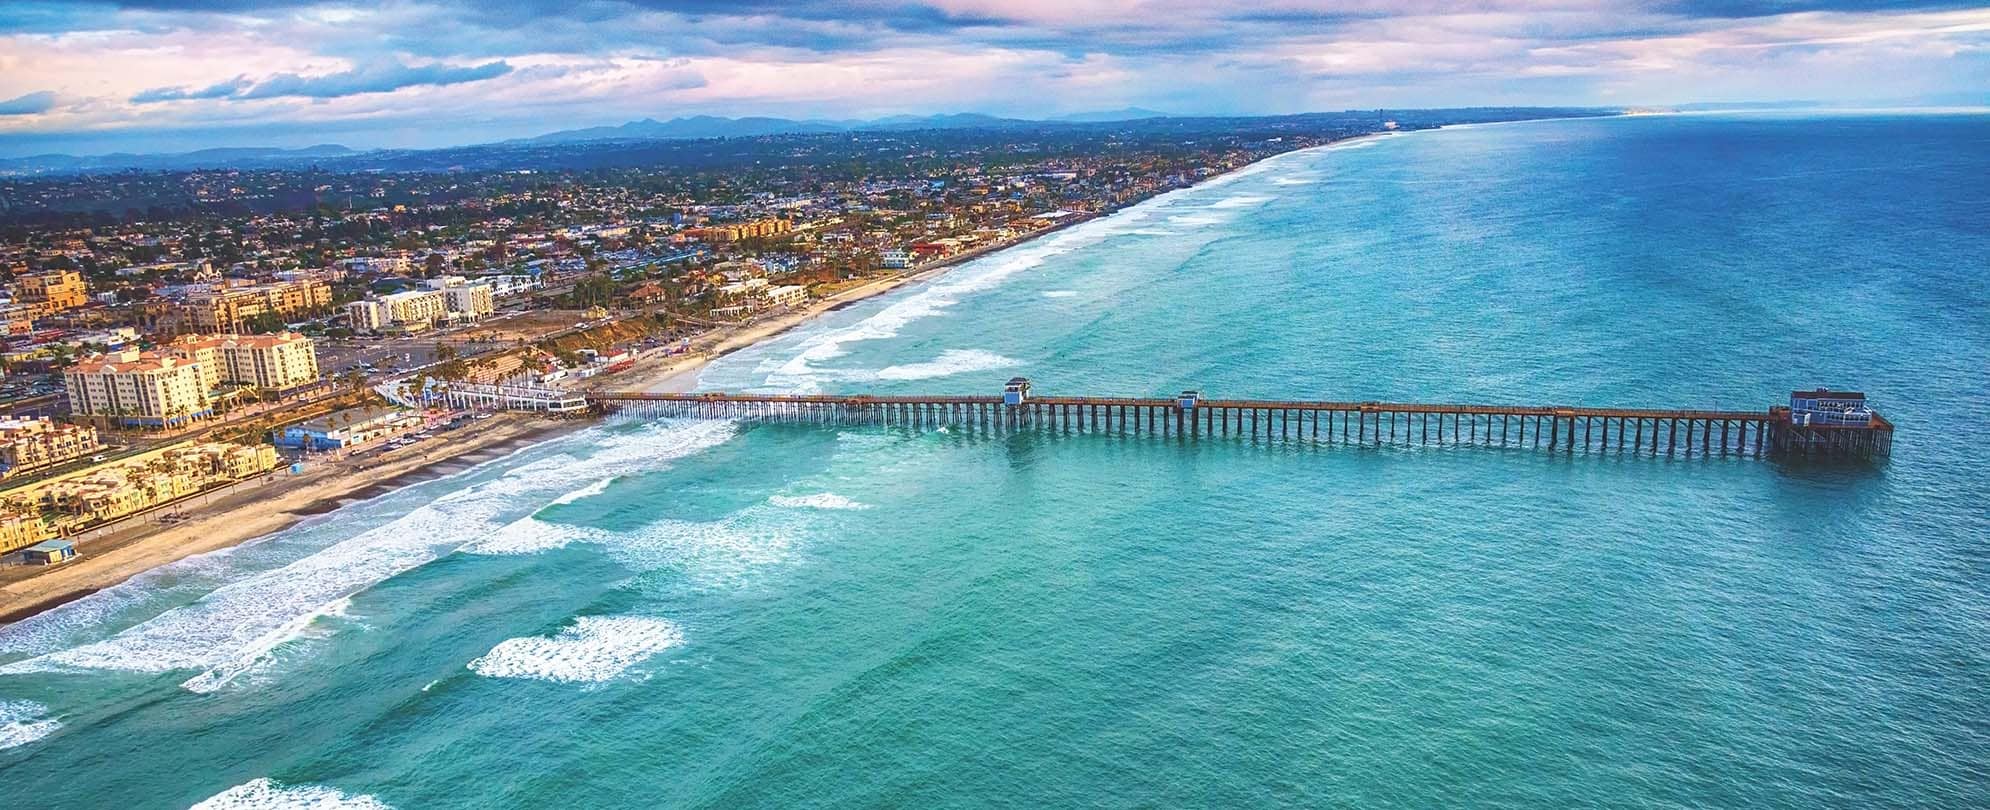 A bird's-eye-view of the Oceanside, California coastline and the Oceanside pier..